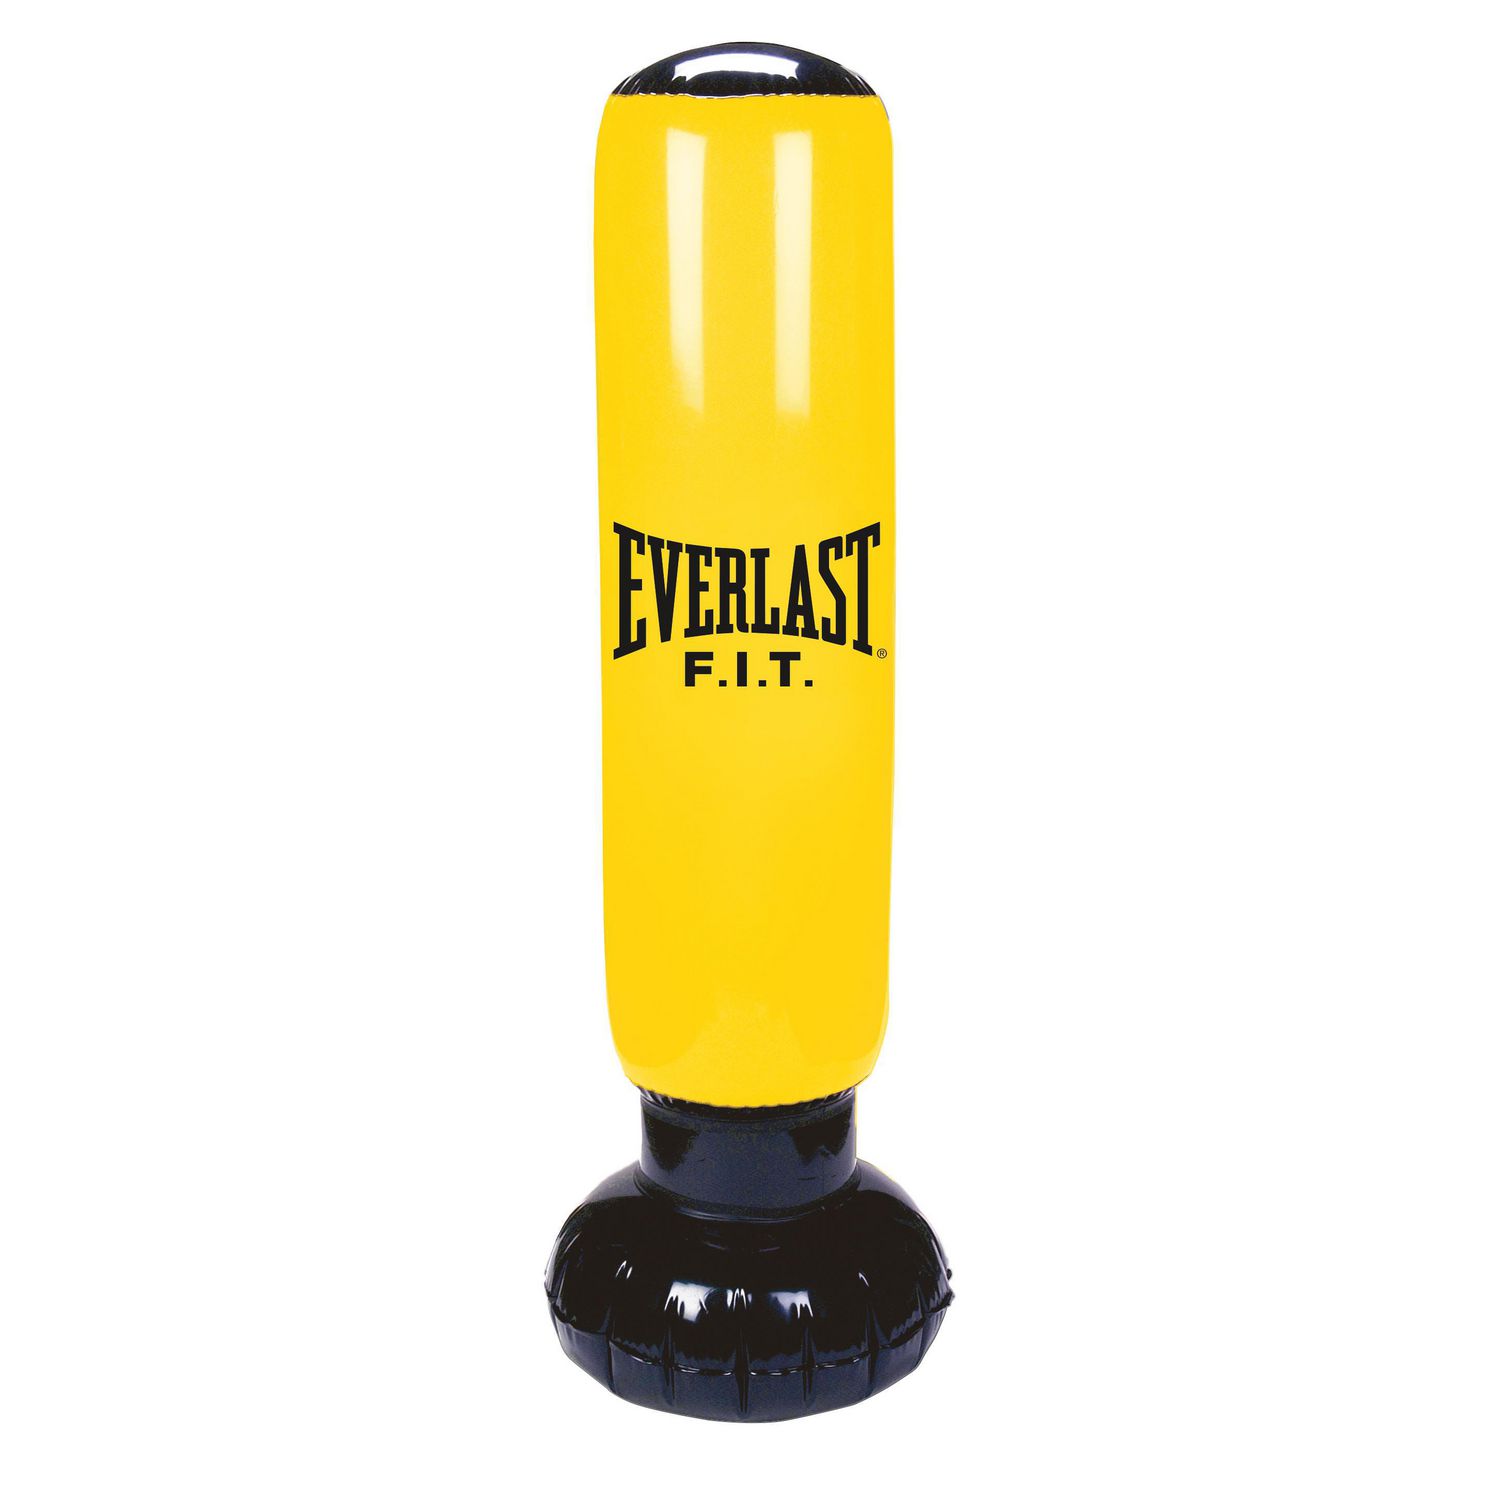 Everlast Power Tower Inflatable punching bag | Walmart Canada